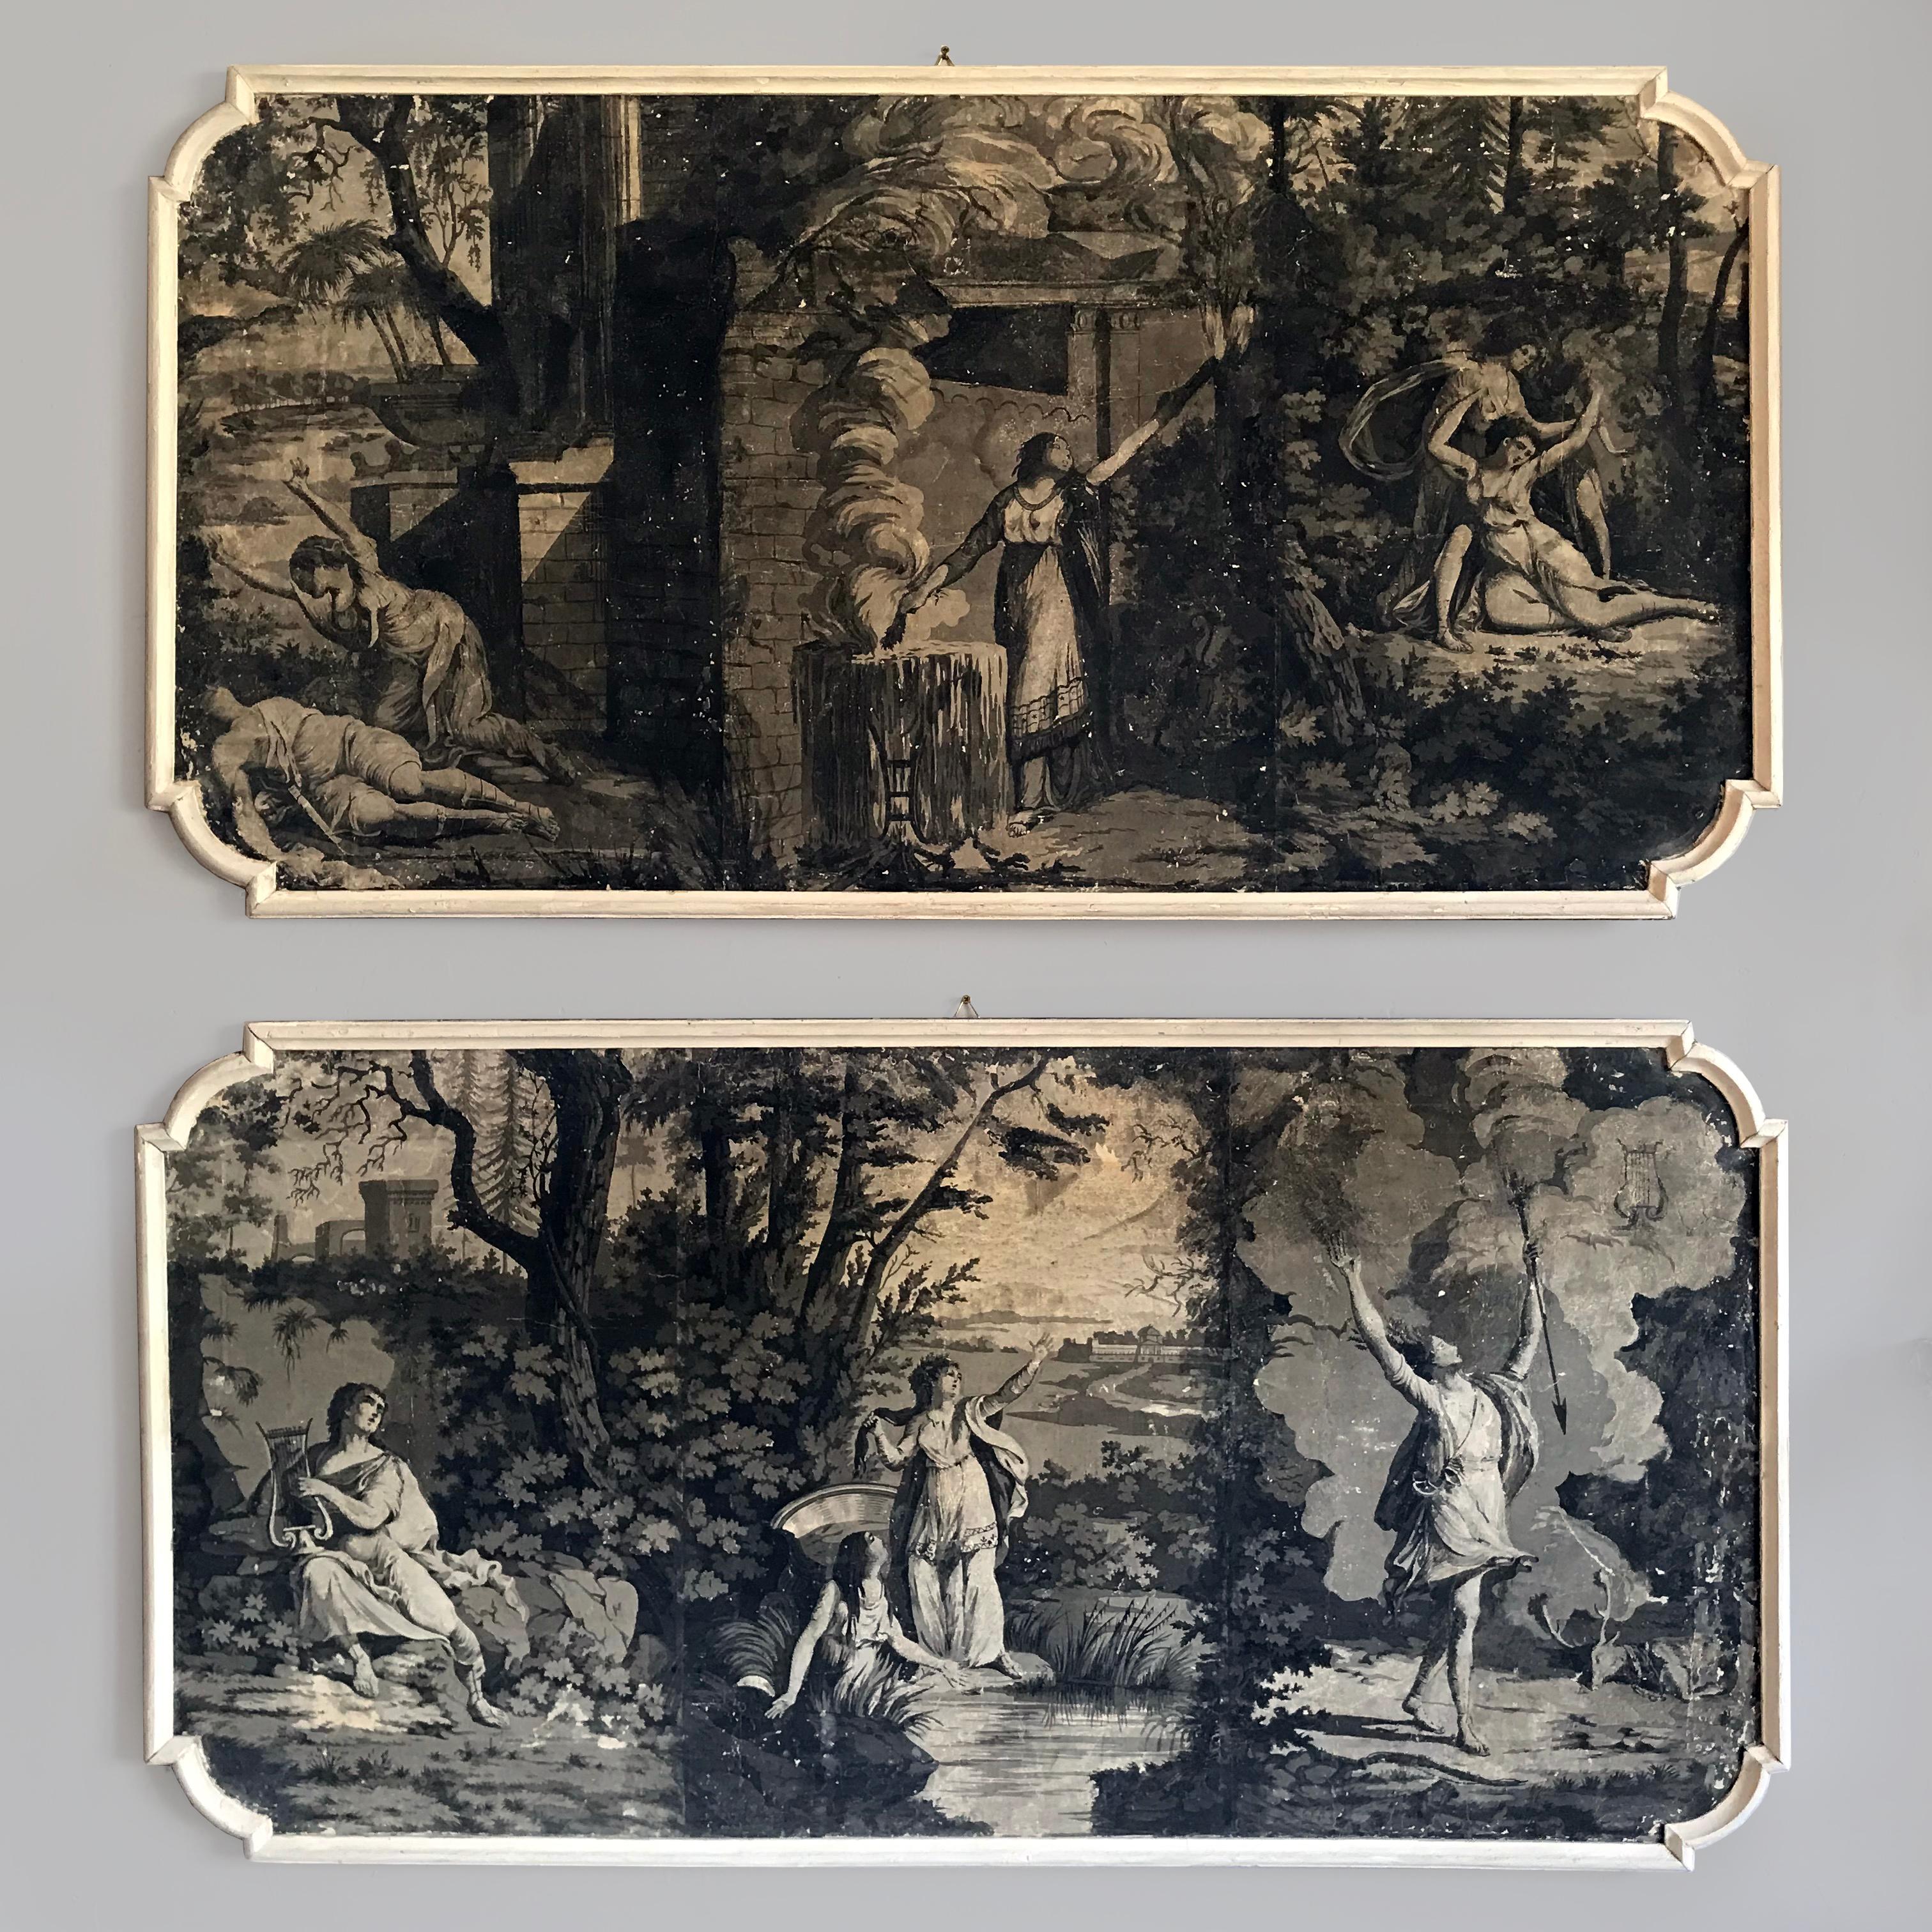 A wonderful rare pair of hand painted French early C19th classical grisaille panels after Dufour-Leroy c.1820.